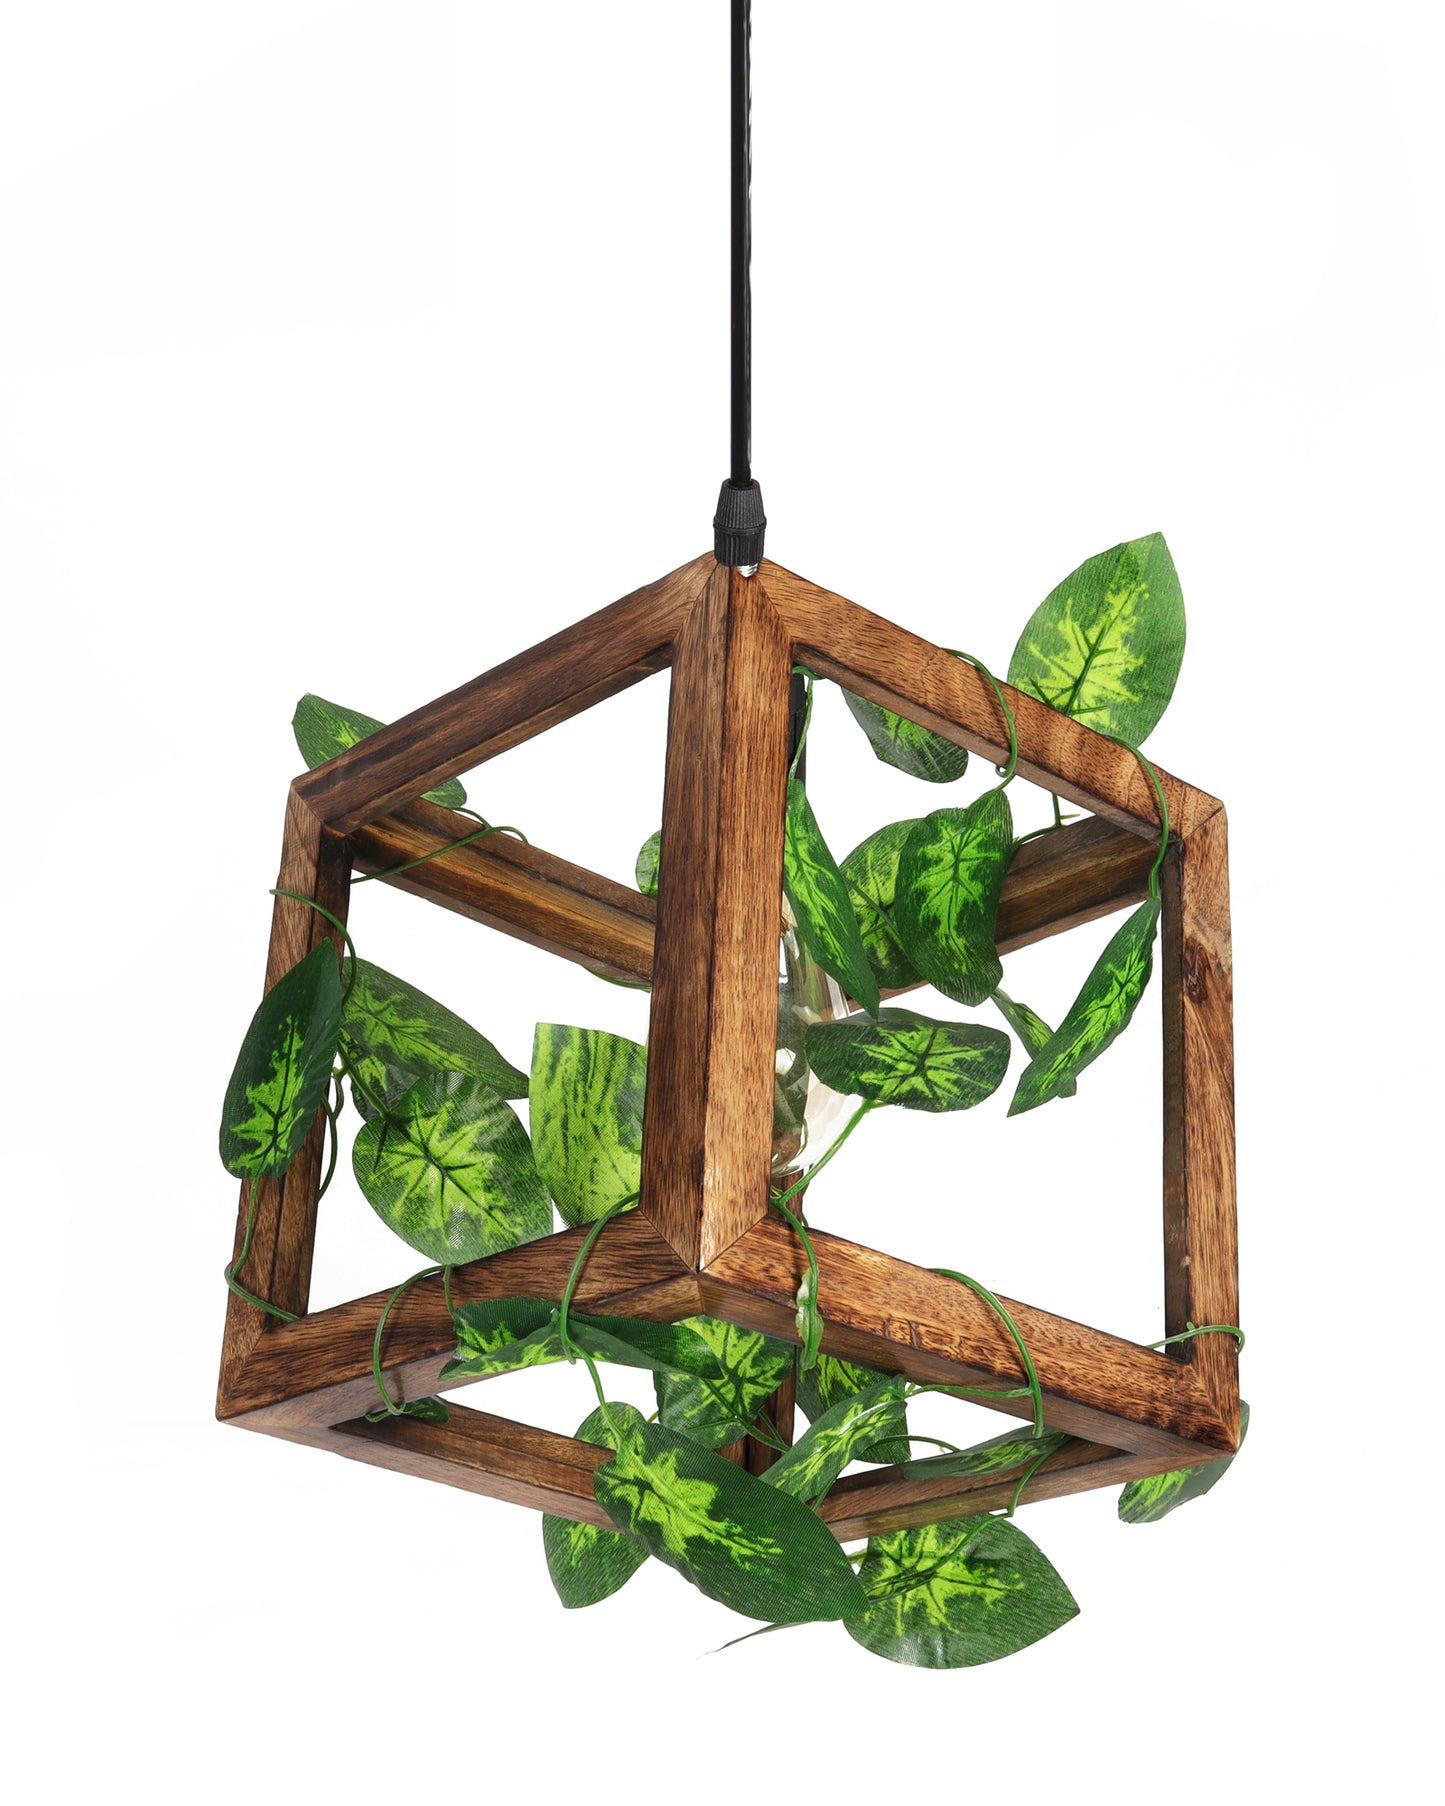 Hanging Pendant Plant Light Fixtures Creative Home Decor Living Room Dining, Ceiling light with leafy vine and filament bulb, Antique Wood Cube